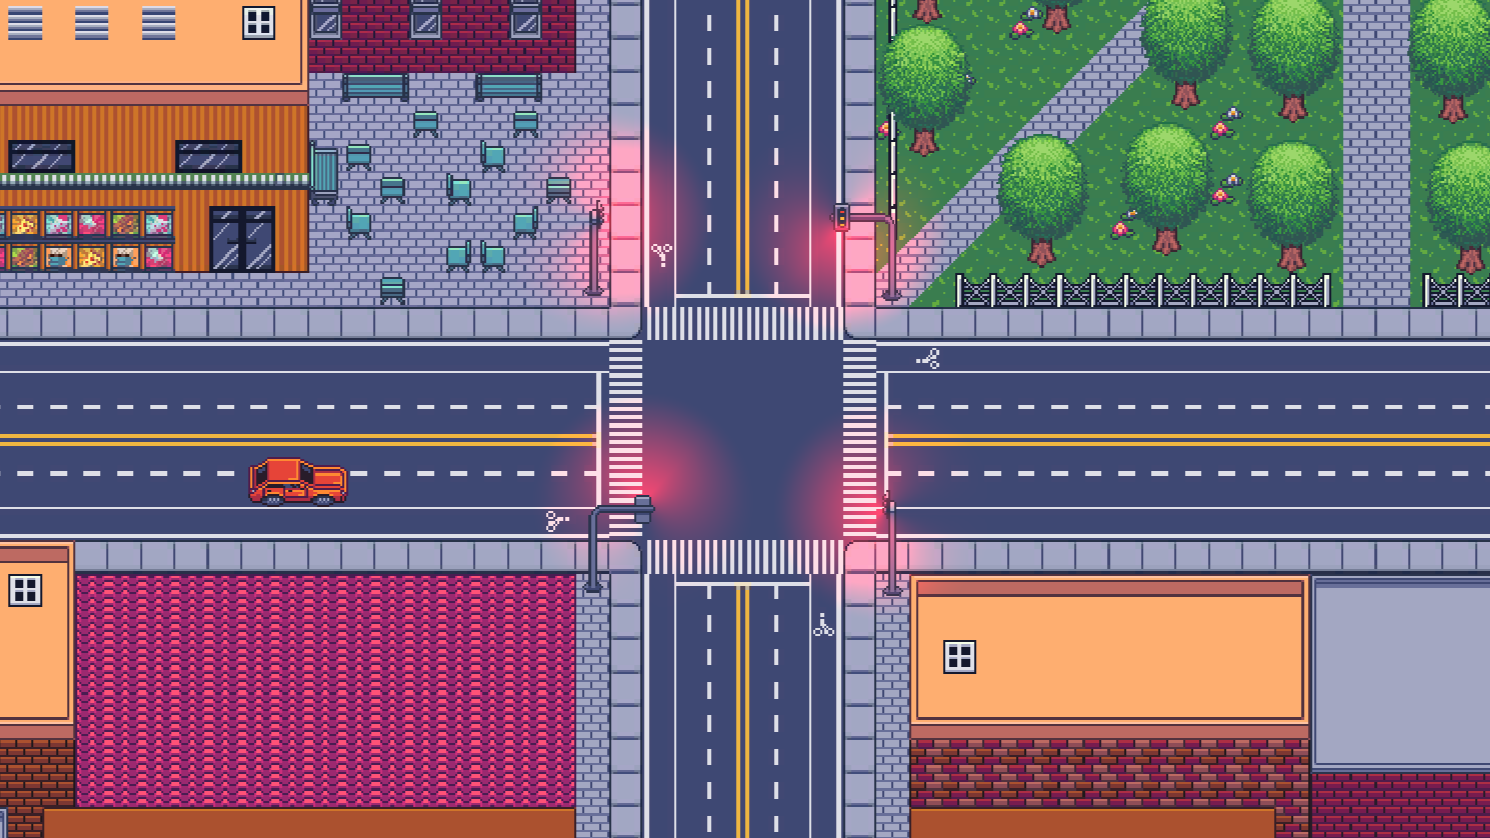 Screenshot of gameplay showing an intersection